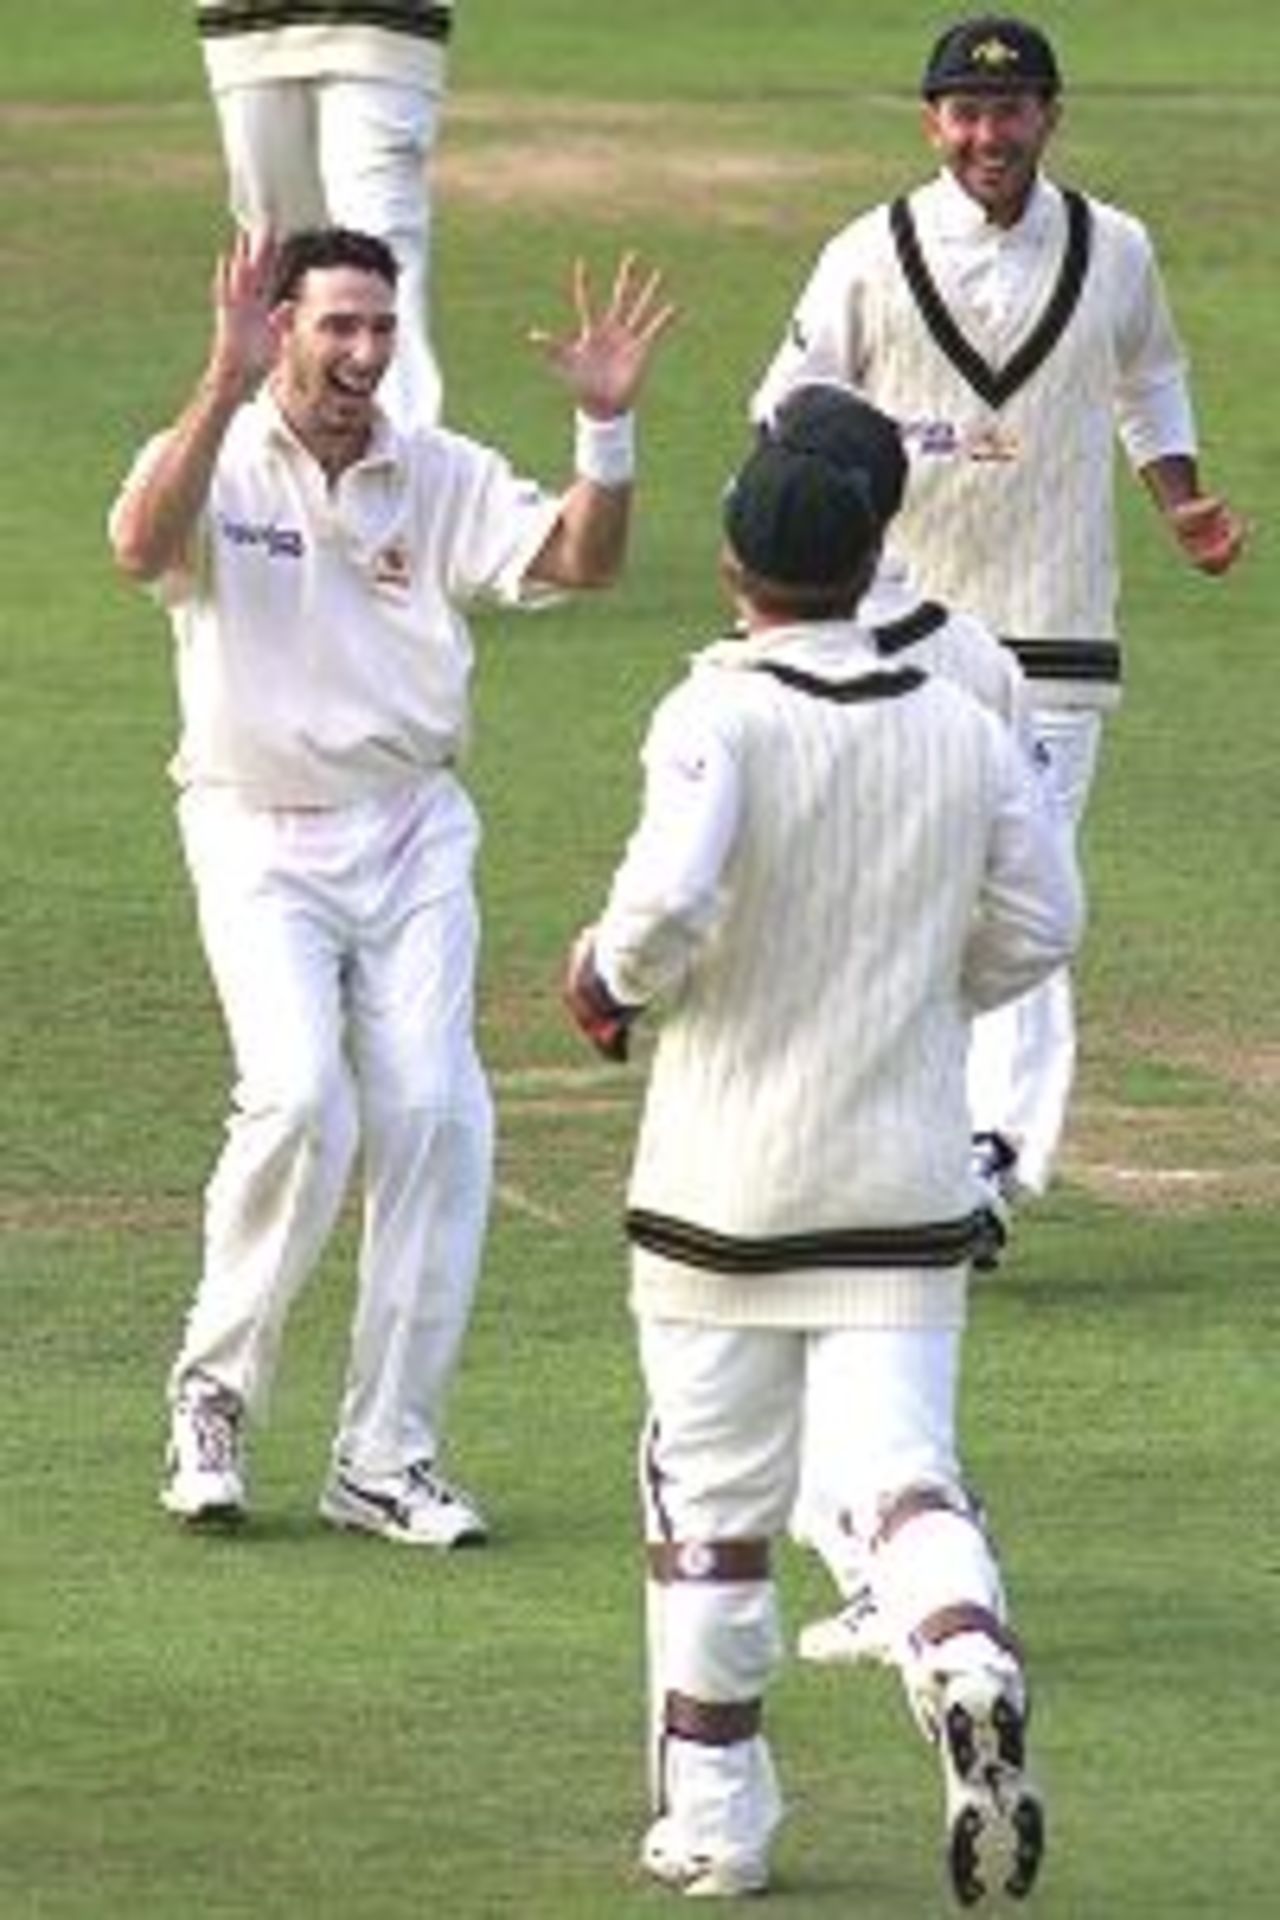 Damien Fleming of Australia celebrates his fifth wicket, Rob Turner of Somerset caught by Justin Langer for 42, during day two of the tour match between Somerset and Australia, played at Somerset County Ground, Taunton, England.